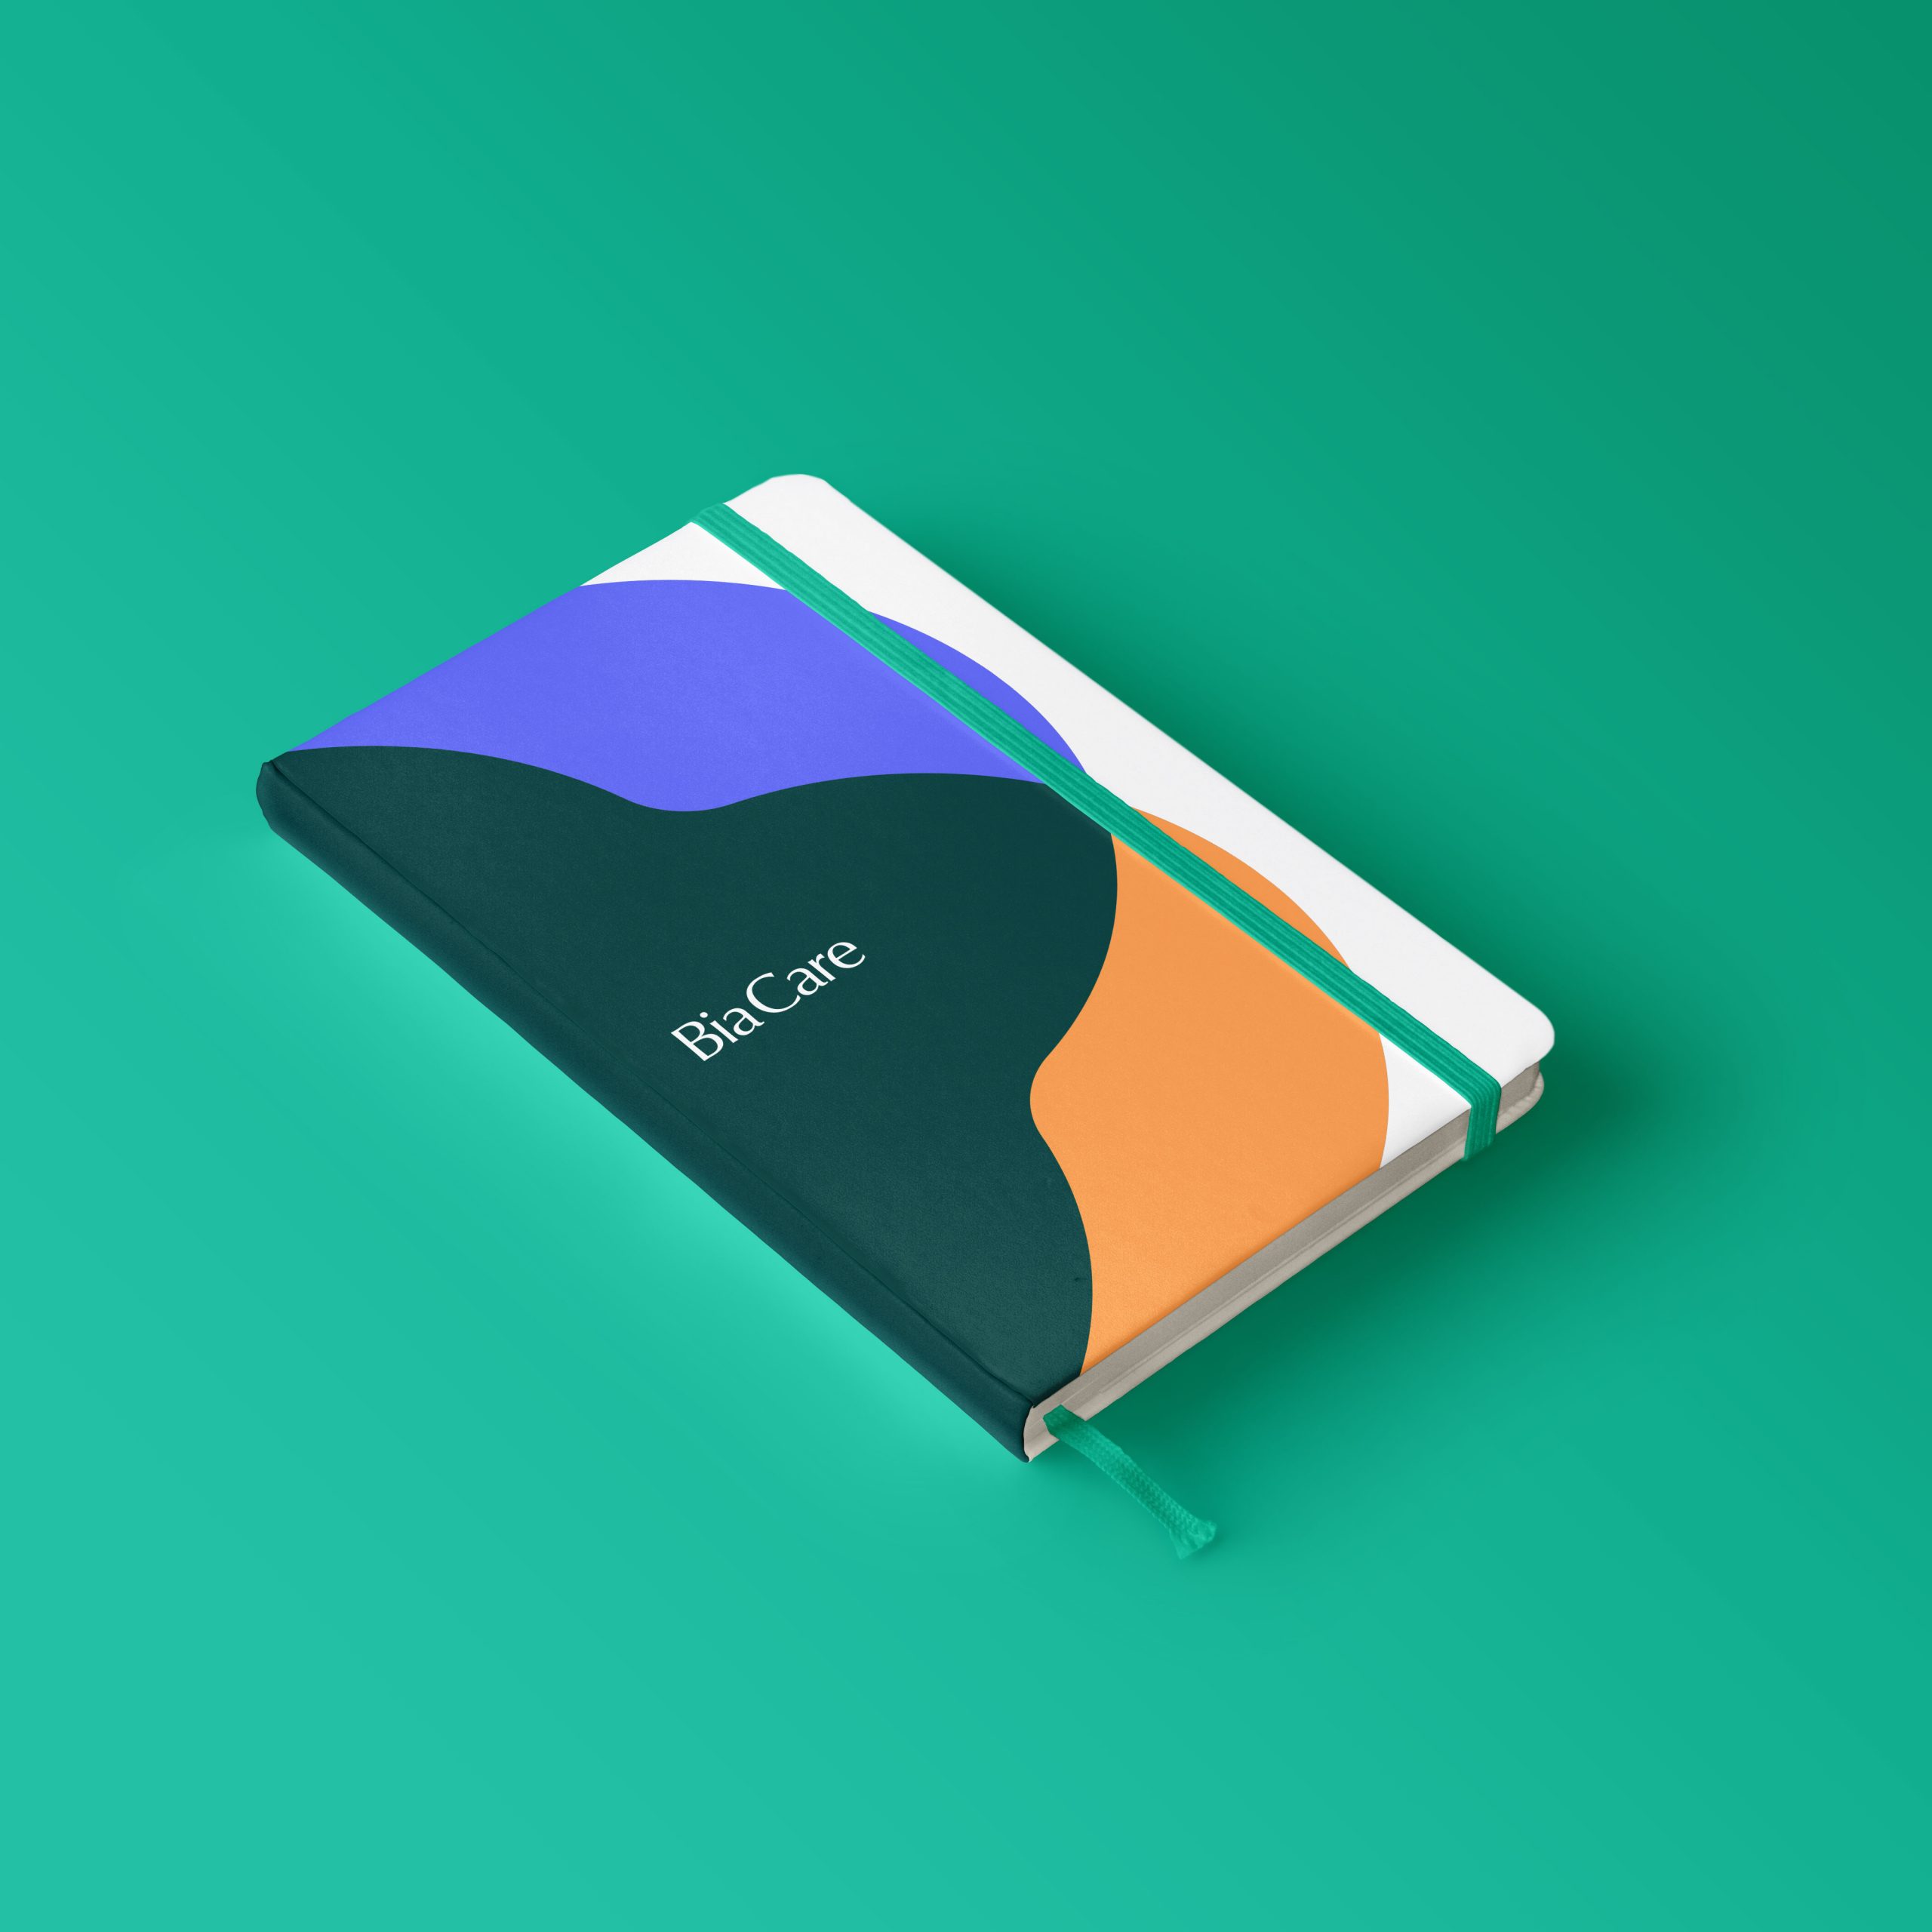 Notebook-Mockup-vol-2-Isometric-view